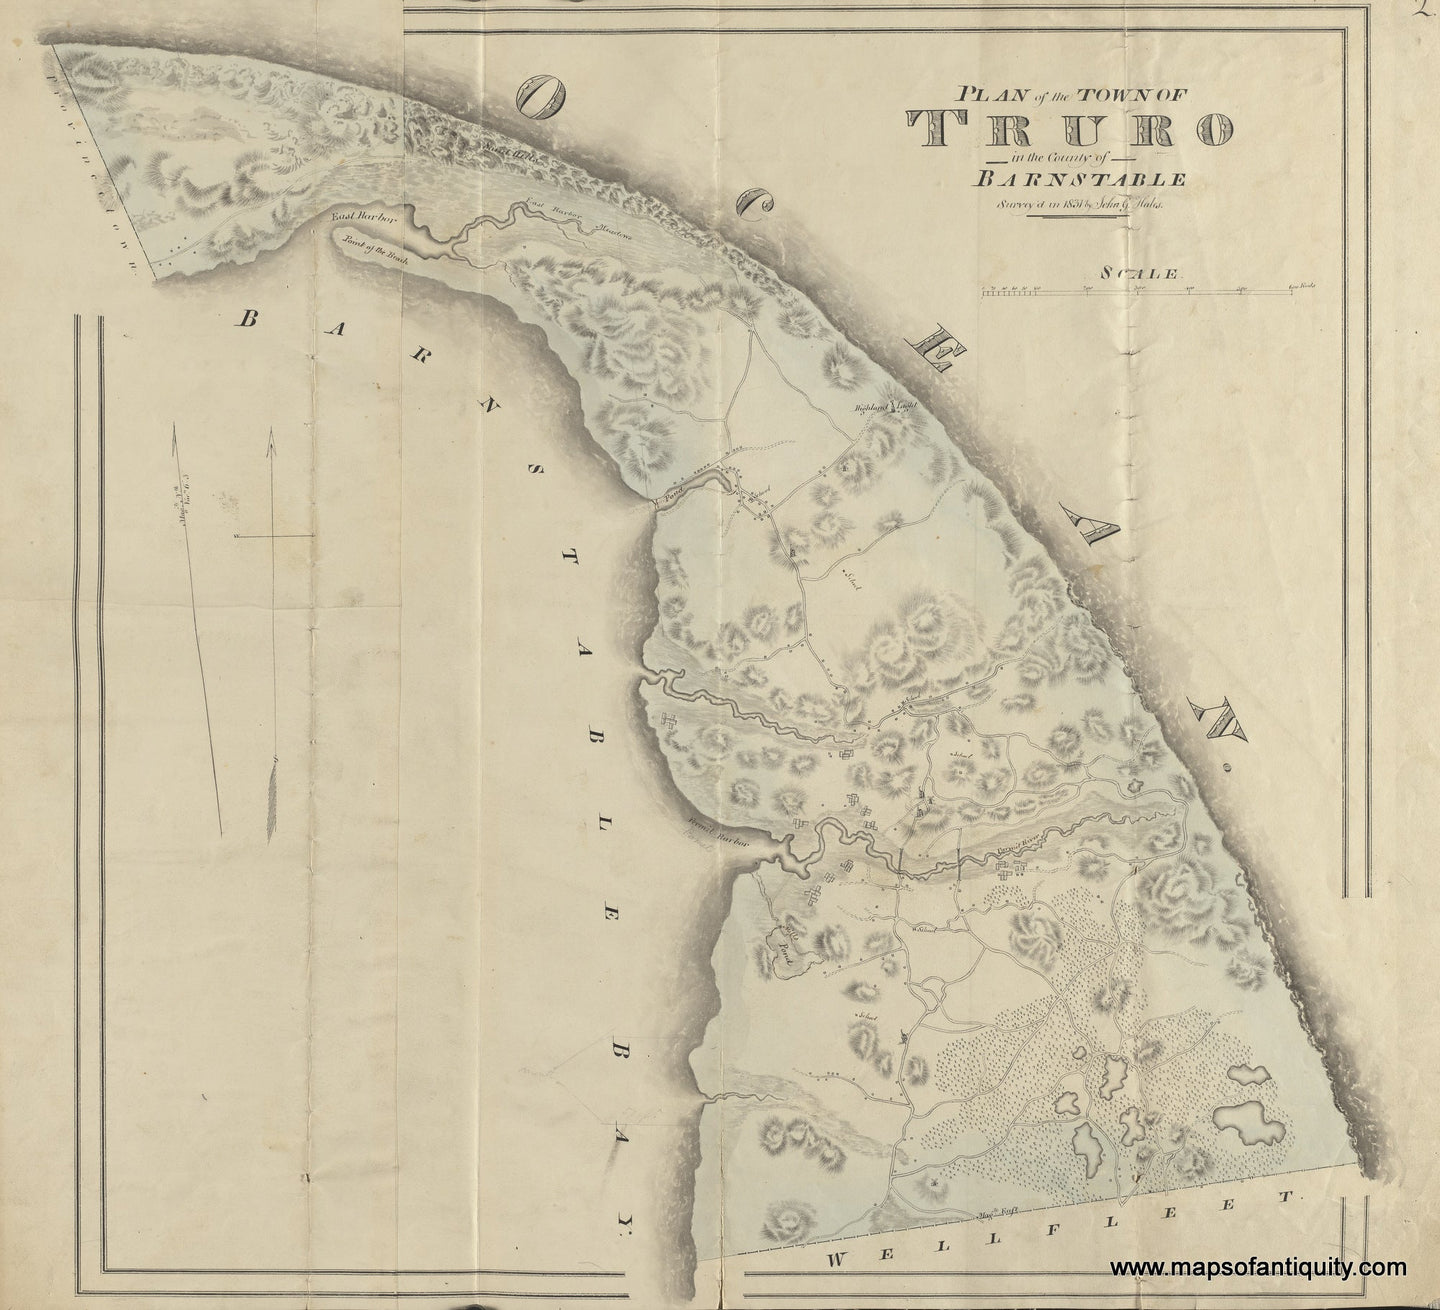 High-Quality-Giclee-Reproduction-Plan-of-the-Town-of-Truro-in-the-County-of-Barnstable-1831---Maps-Of-Antiquity